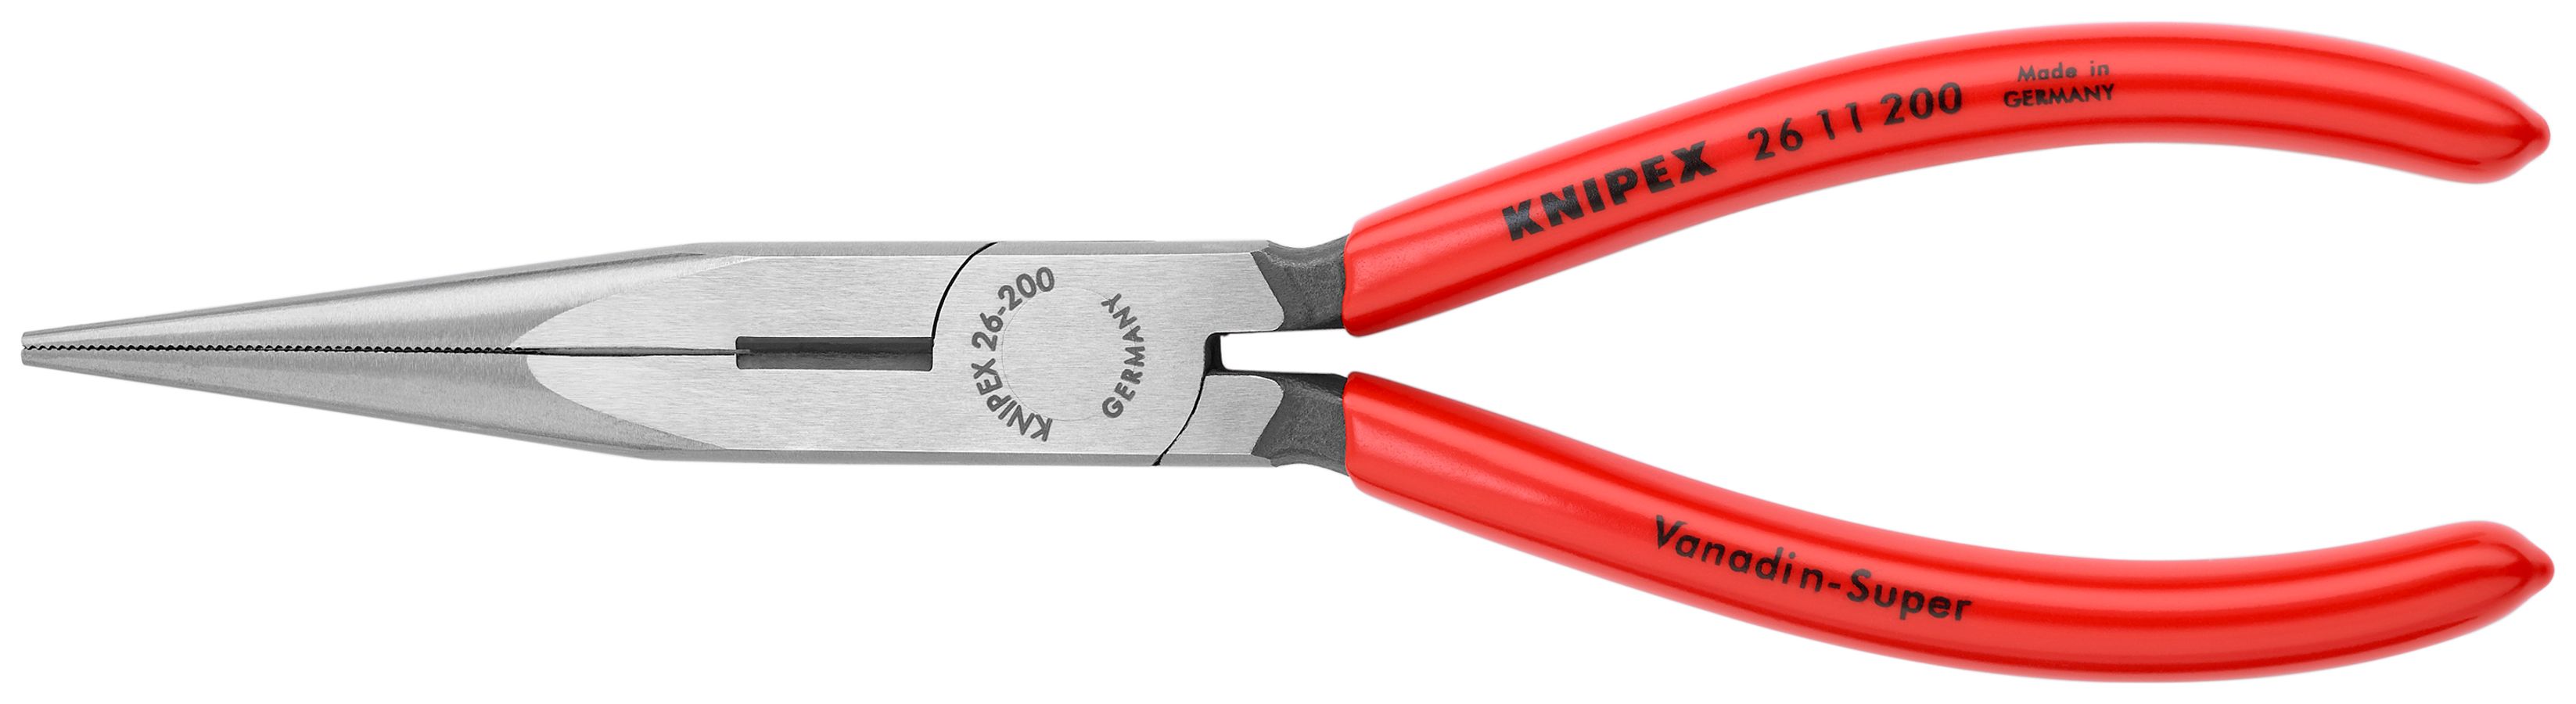 KNIPEX Tools - Long Nose Pliers With Cutter (2611200), 8 - Needle Nose  Pliers 